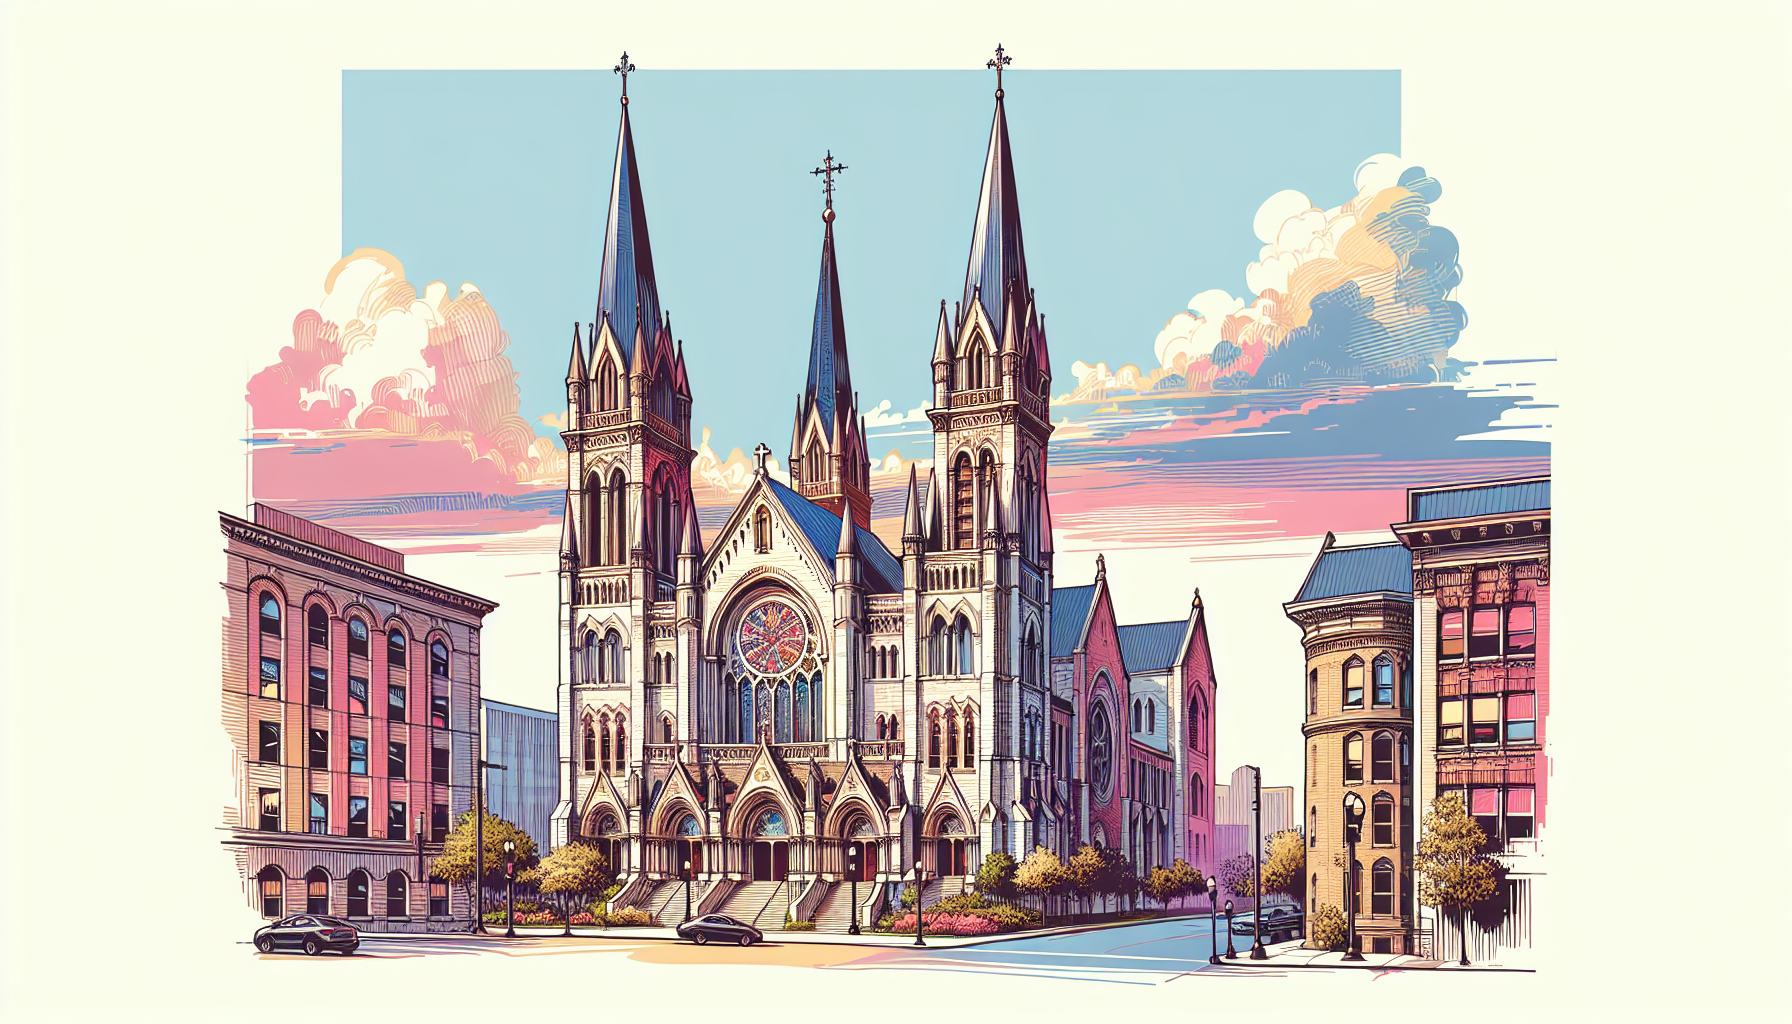 Create an image of a grand and monumental church in the heart of the United States, showcasing its towering spires, intricate architecture, and impressive scale that reflects it as the largest church